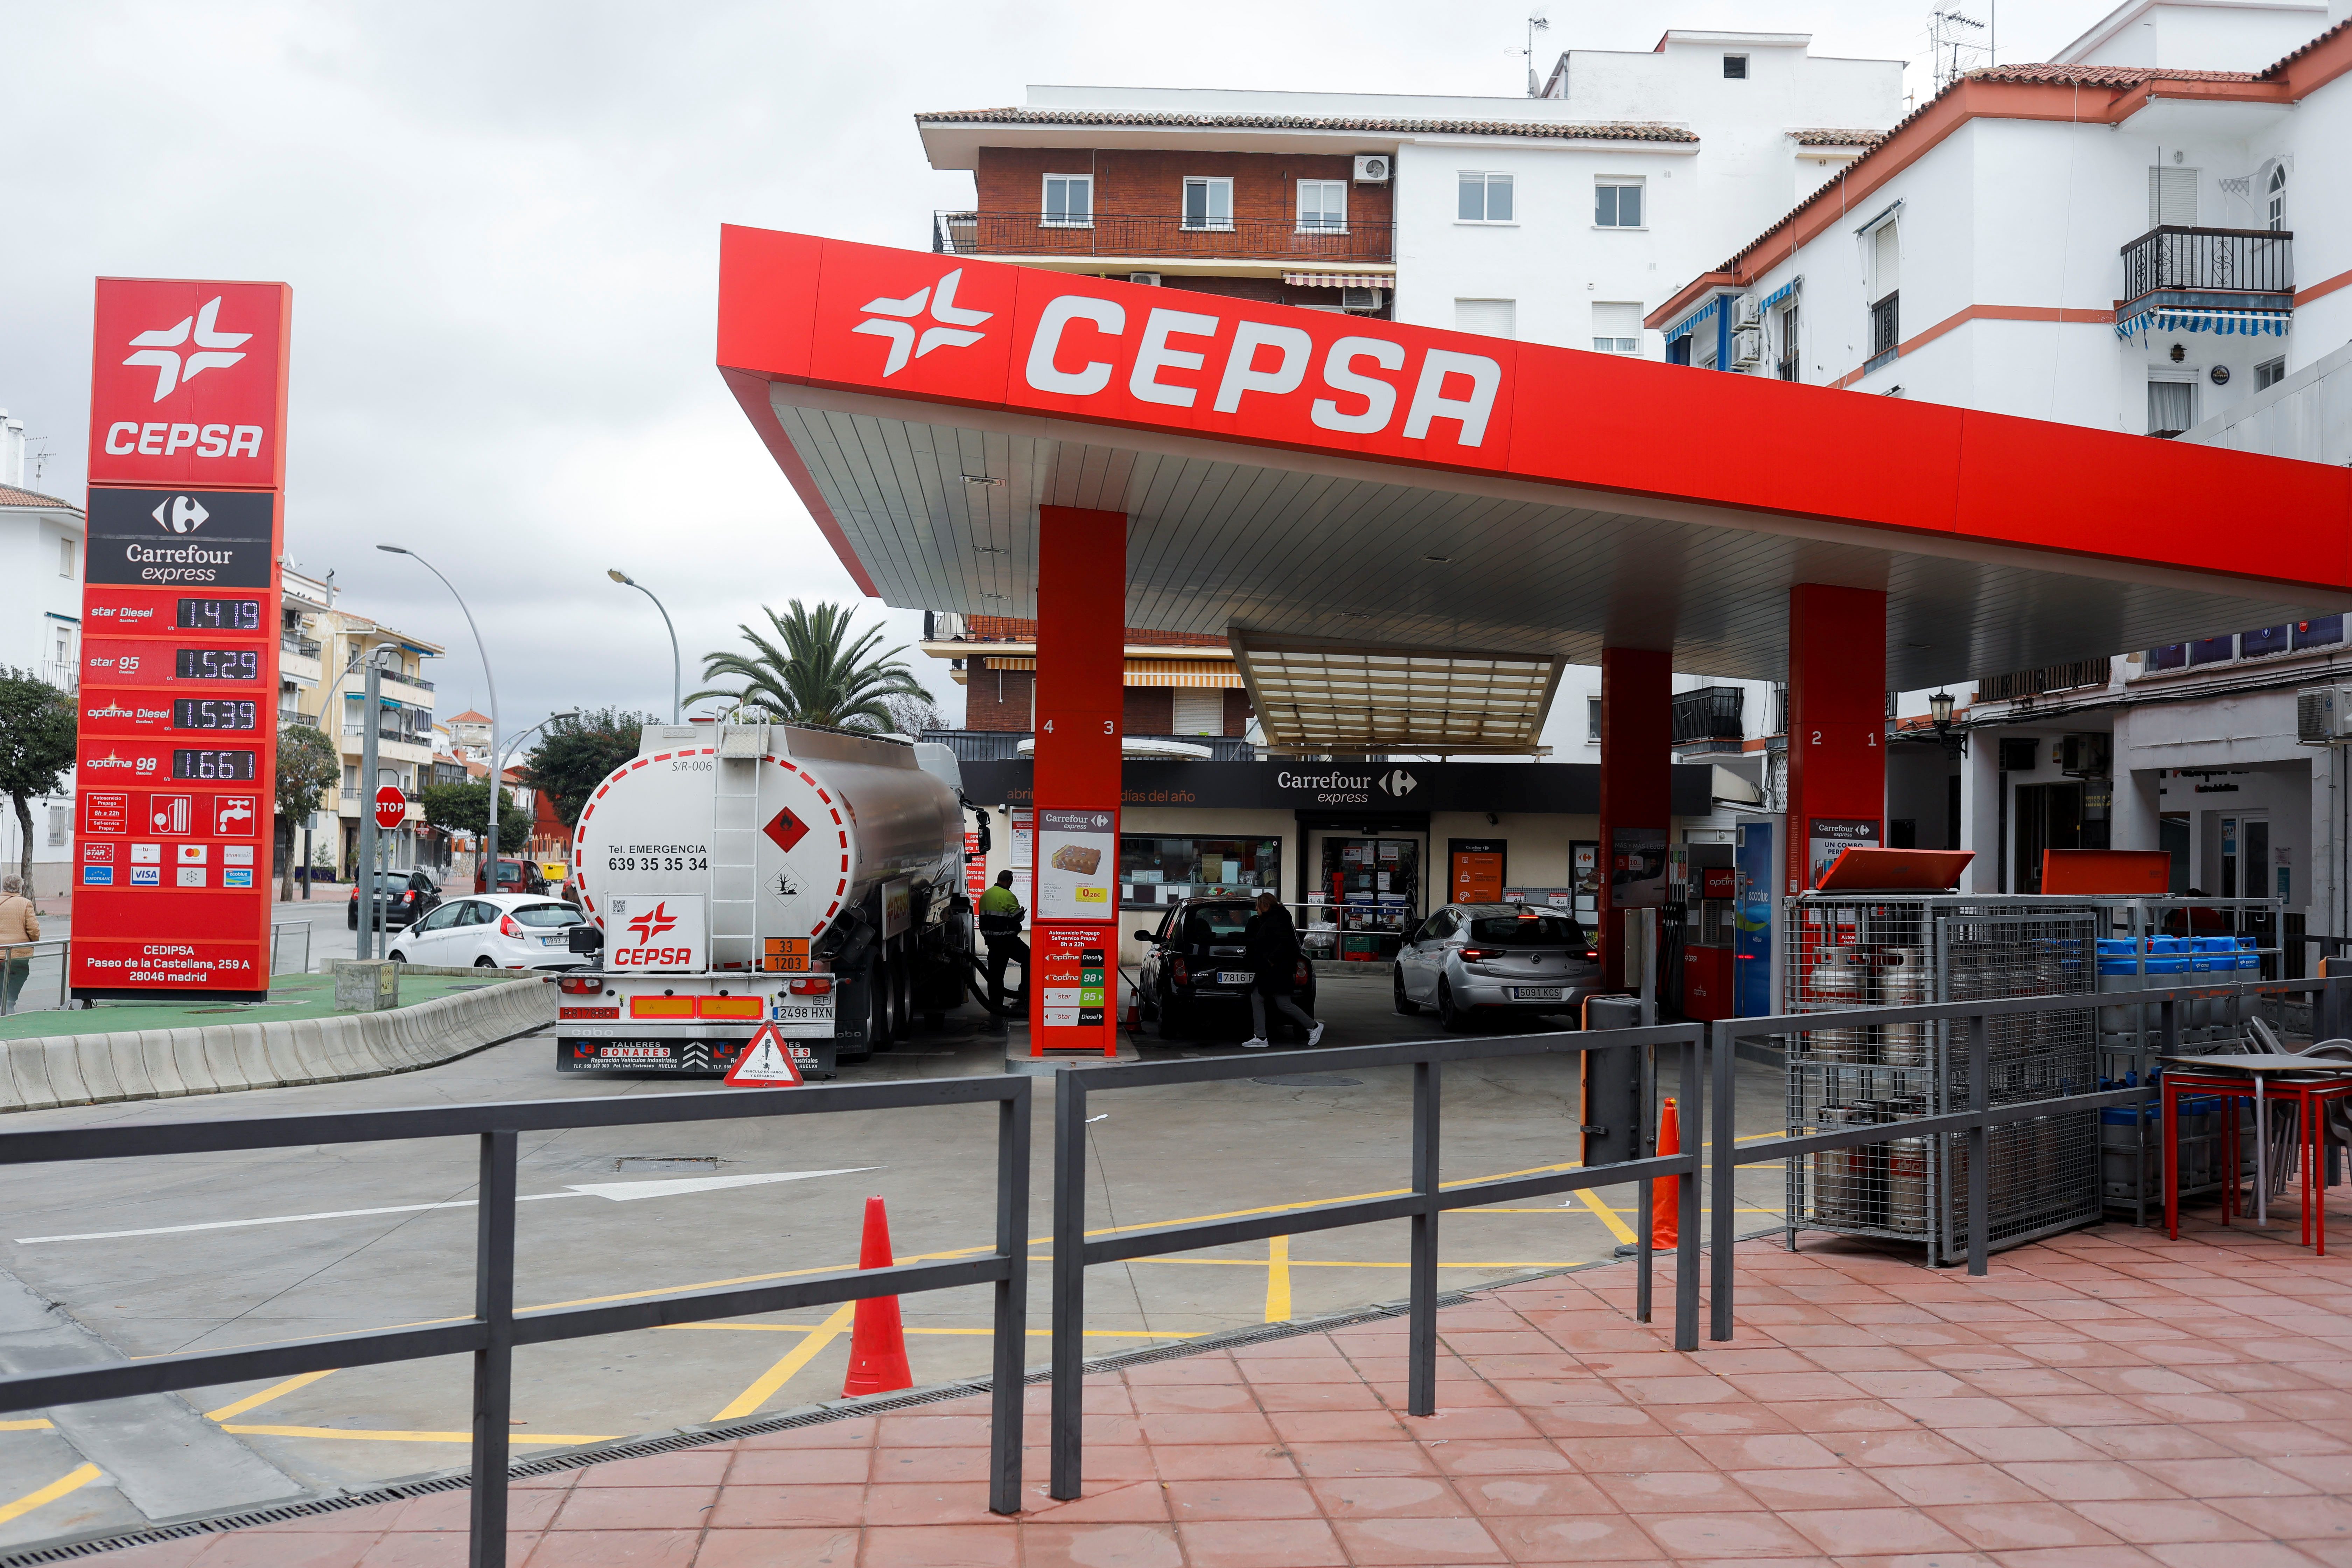 A worker refills fuel at a Cepsa petrol station in Ronda